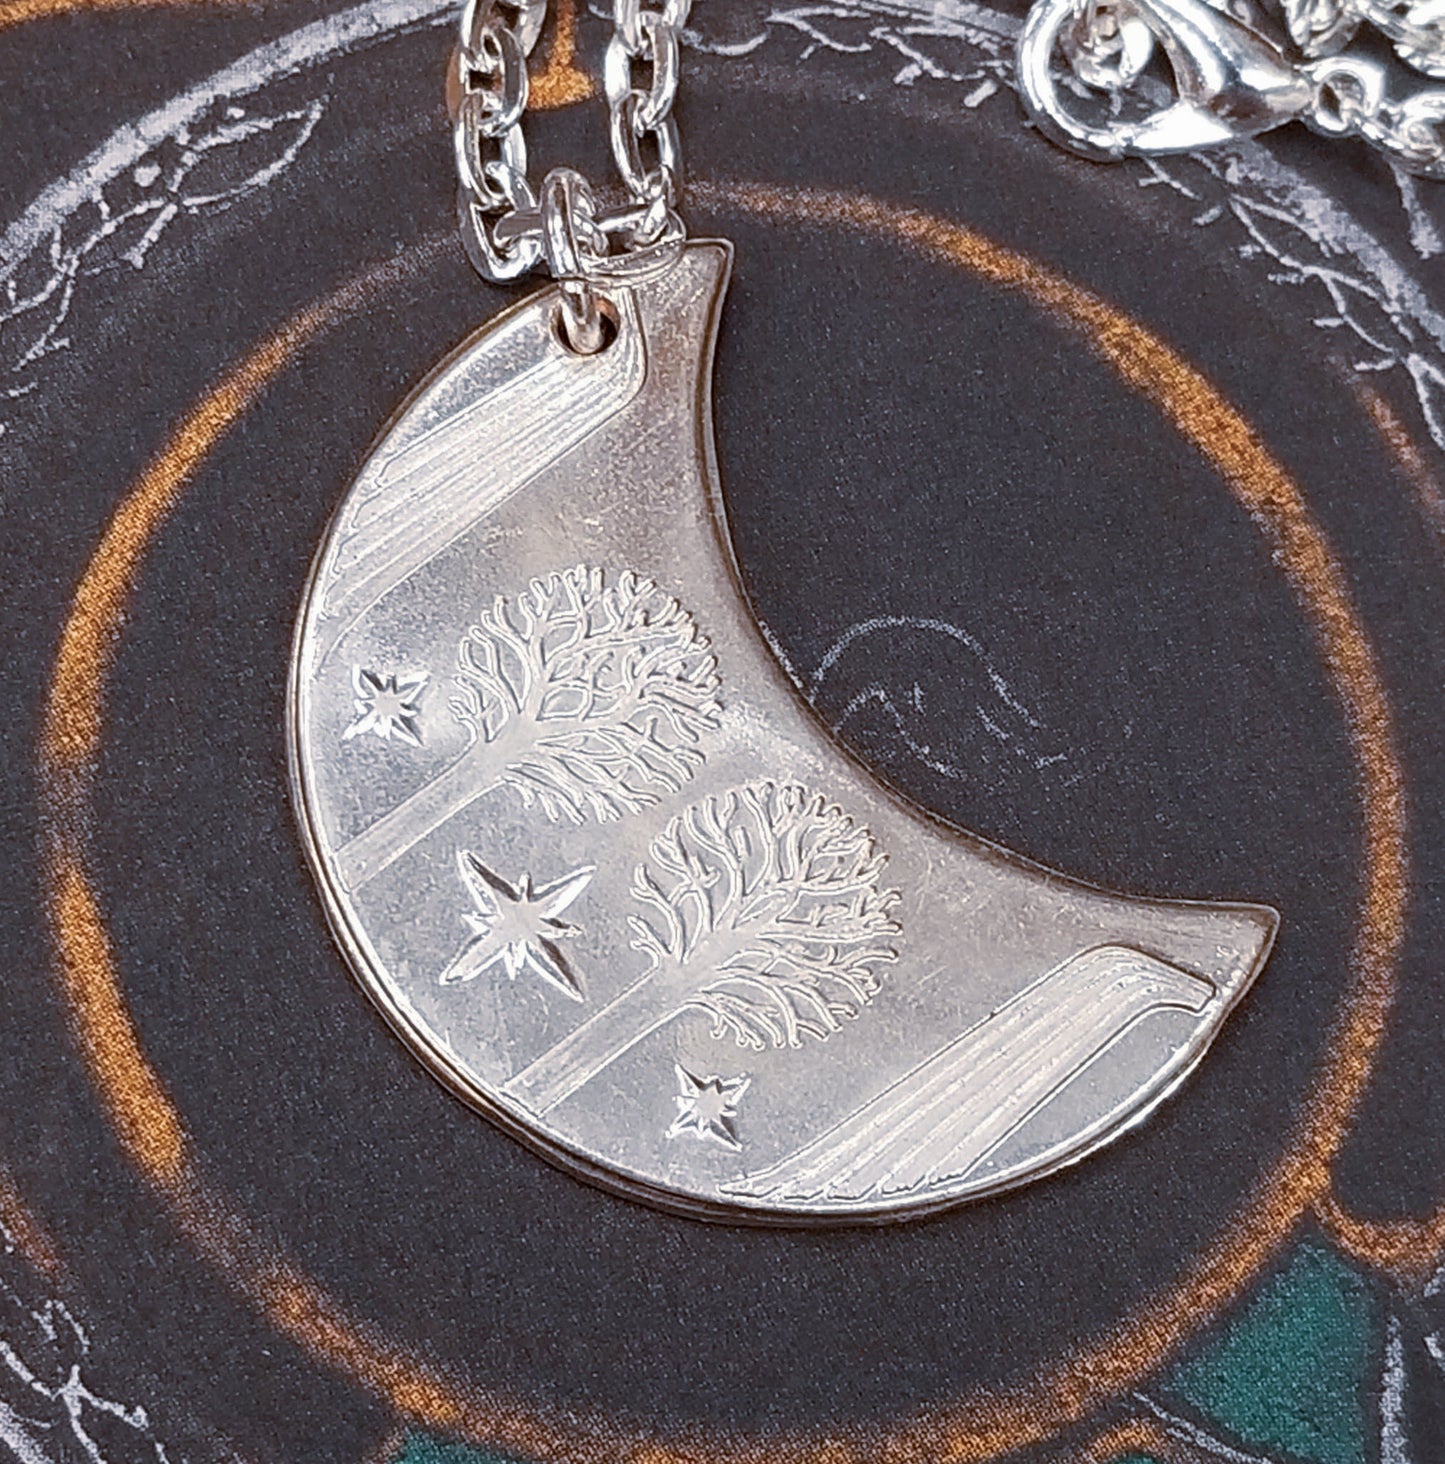 Elvish coin from Rivendell is shaped like a crescent moon. It depicts the valley containing the ancient trees of silver and gold and the three Silmarils, represented as stars. The text in Tengwar translates from Sindarin to Elrond Peredhil, Lord of Rivendell, The Last Homely House East of the Sea. It includes the date that Thorin and Company meet Elrond at Rivendell before continuing on to The Lonely Mountain.  This Rivendell Moon is crafted in celebration of The Lord of the Rings by J. R. R. Tolkien